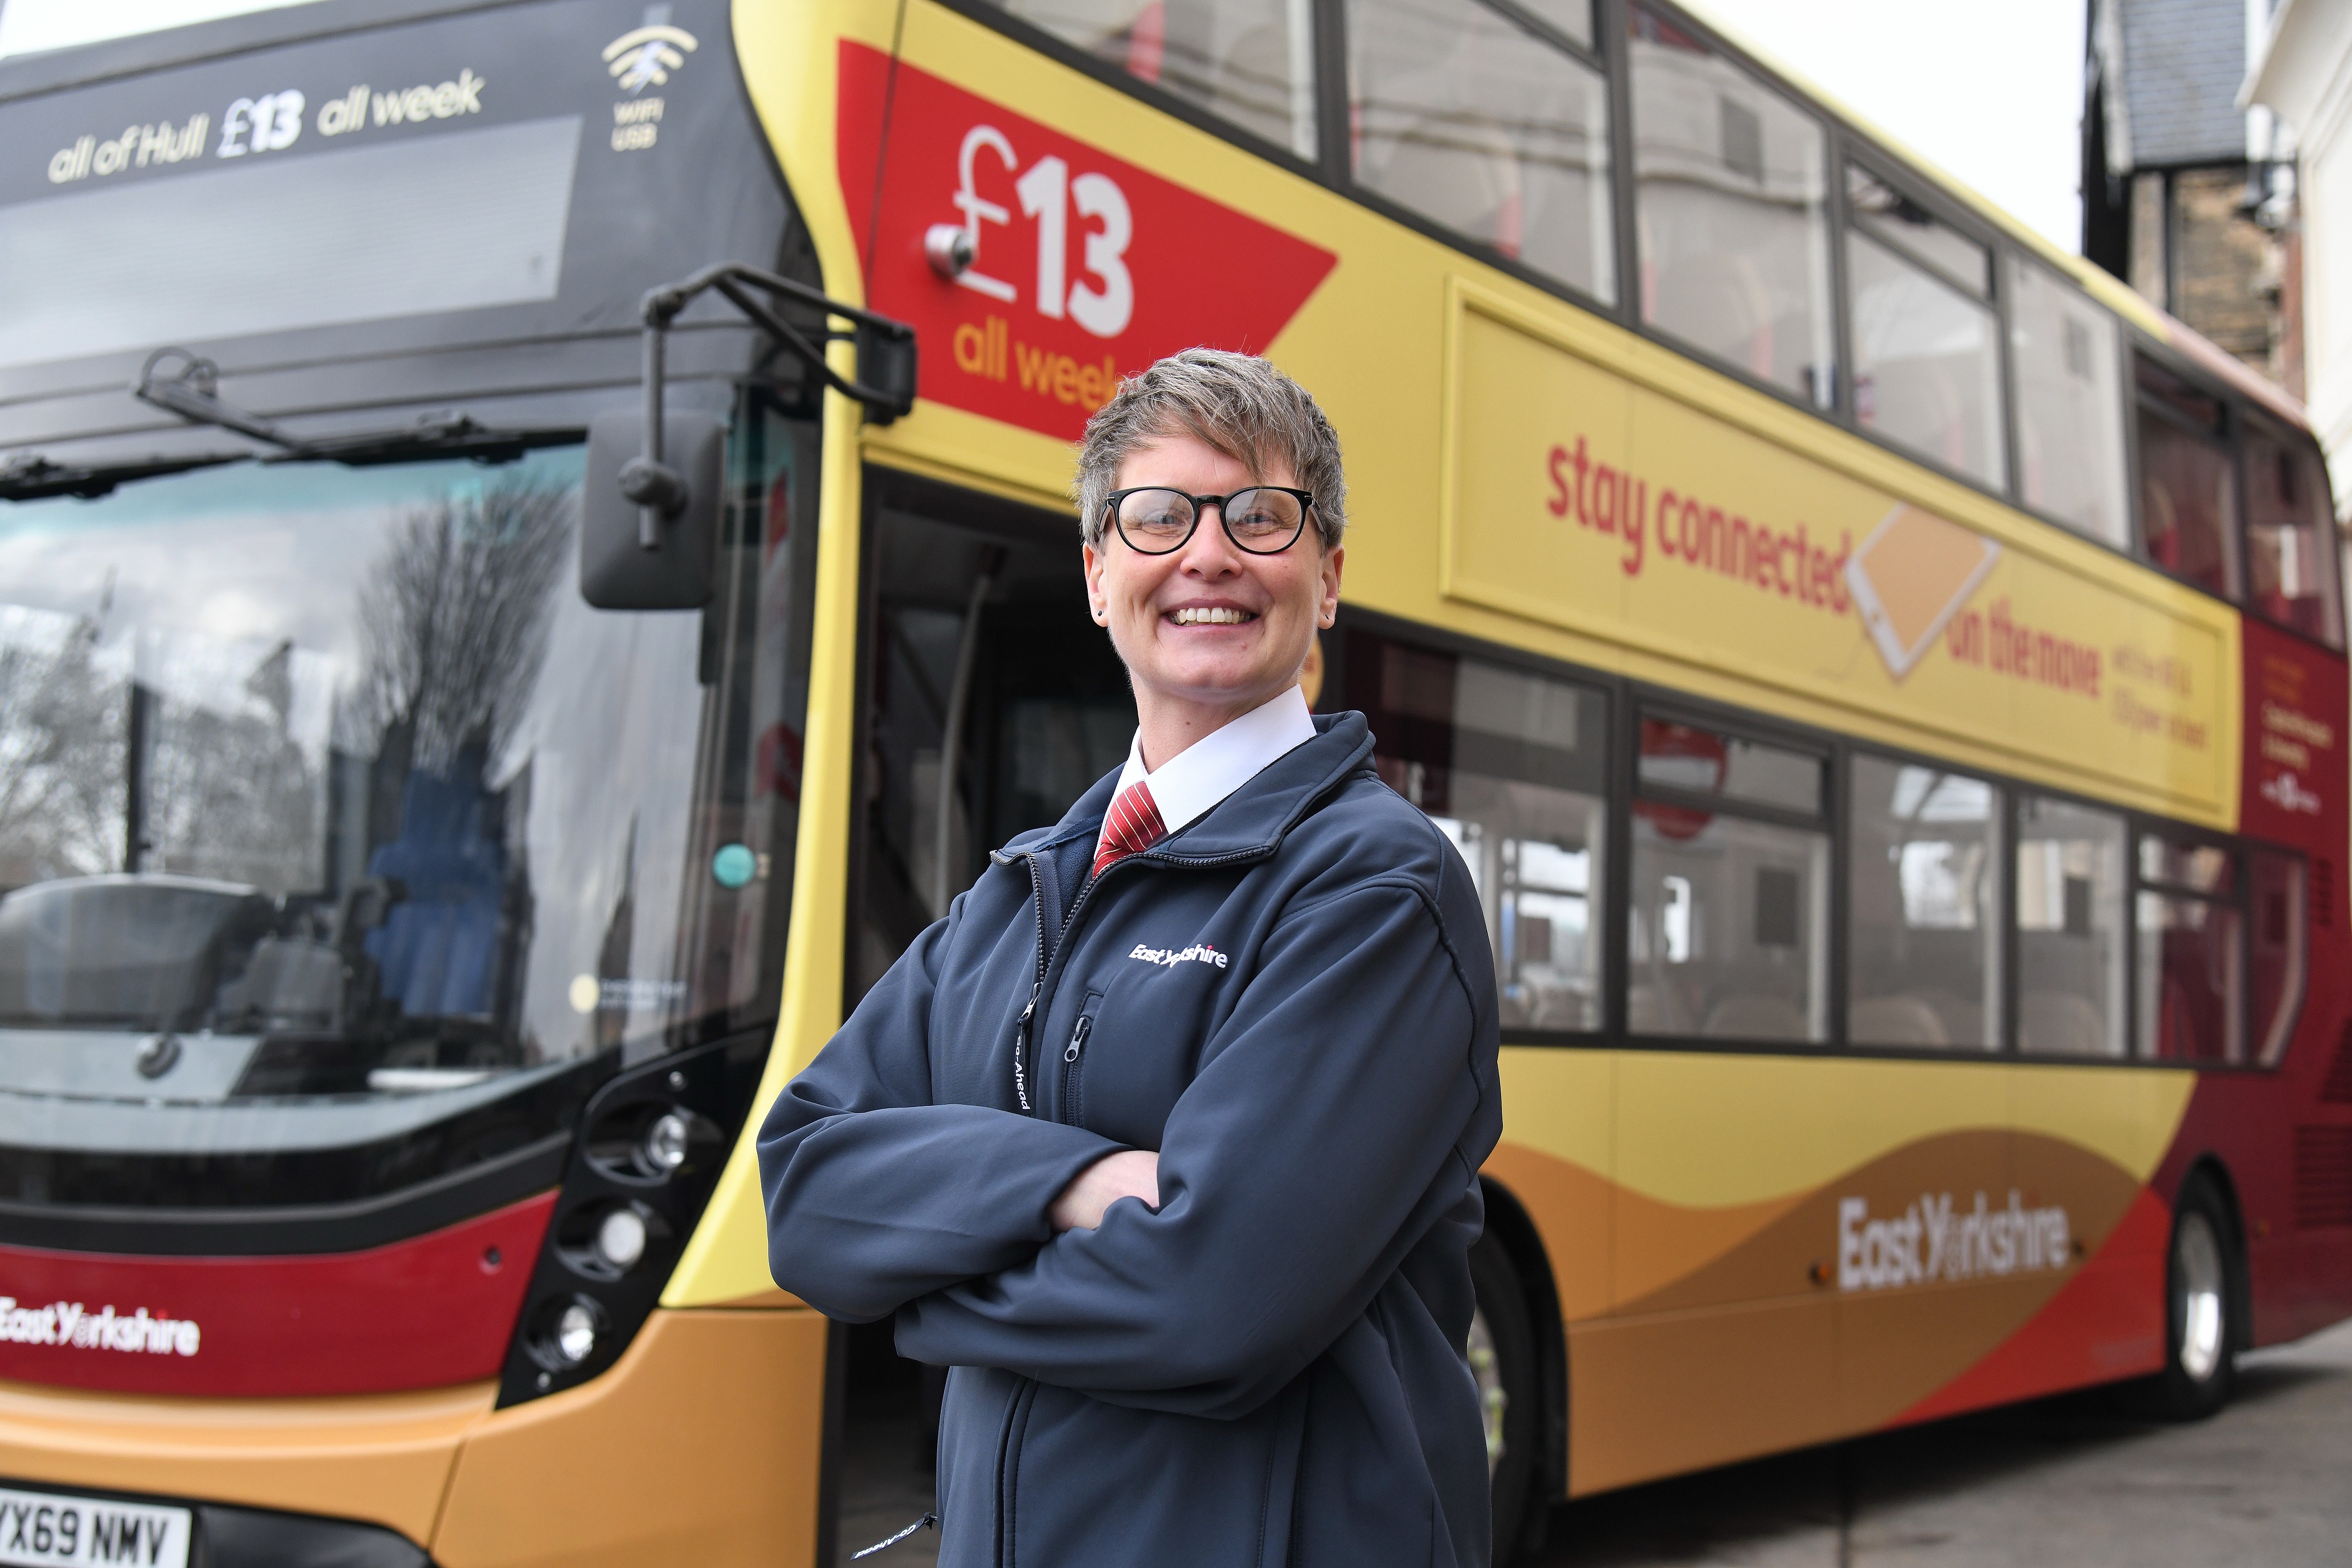 Woman standing in front of red and yellow bus